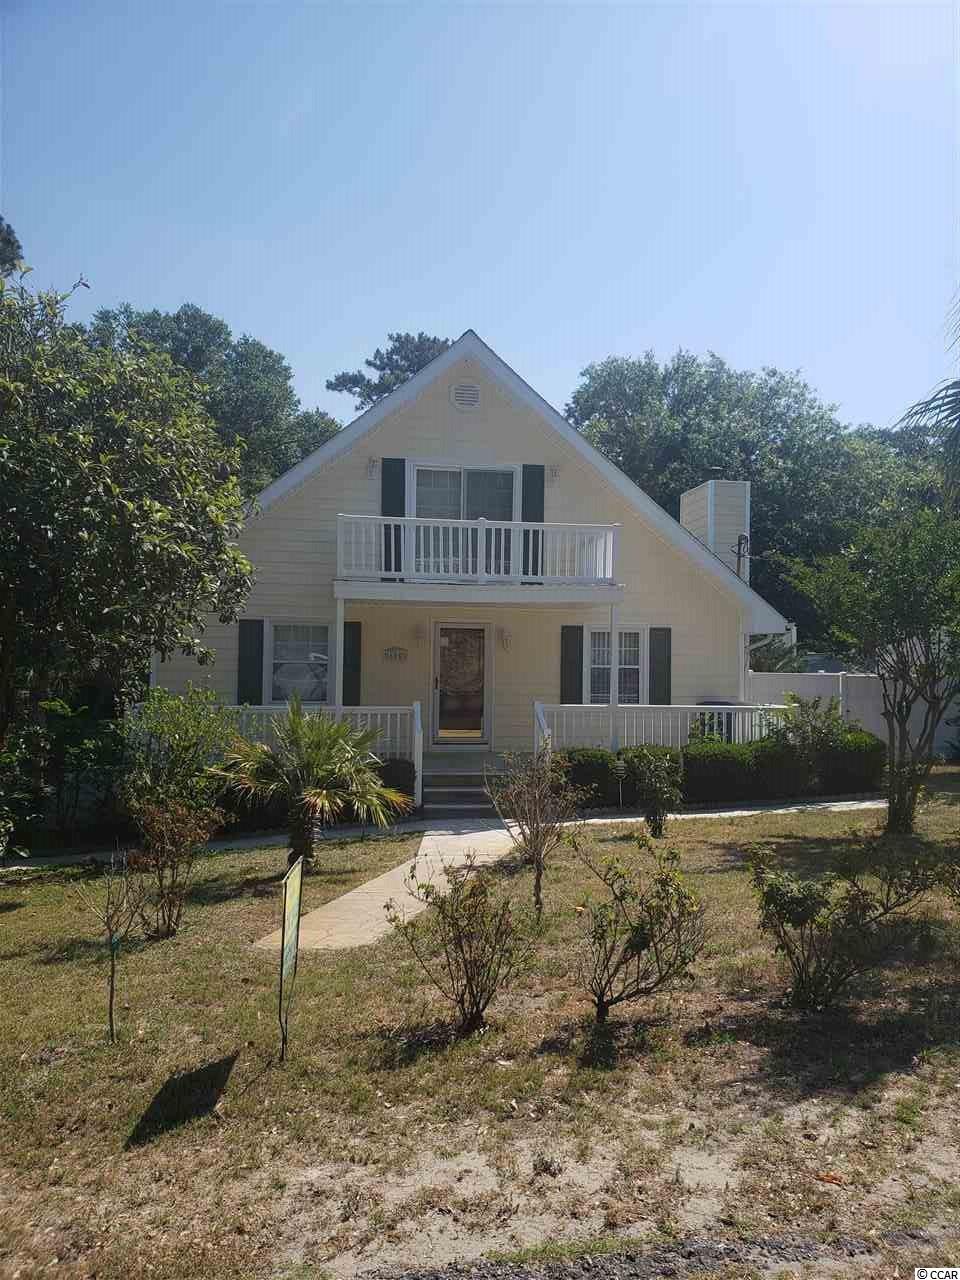 608 43rd Ave. S North Myrtle Beach, SC 29582